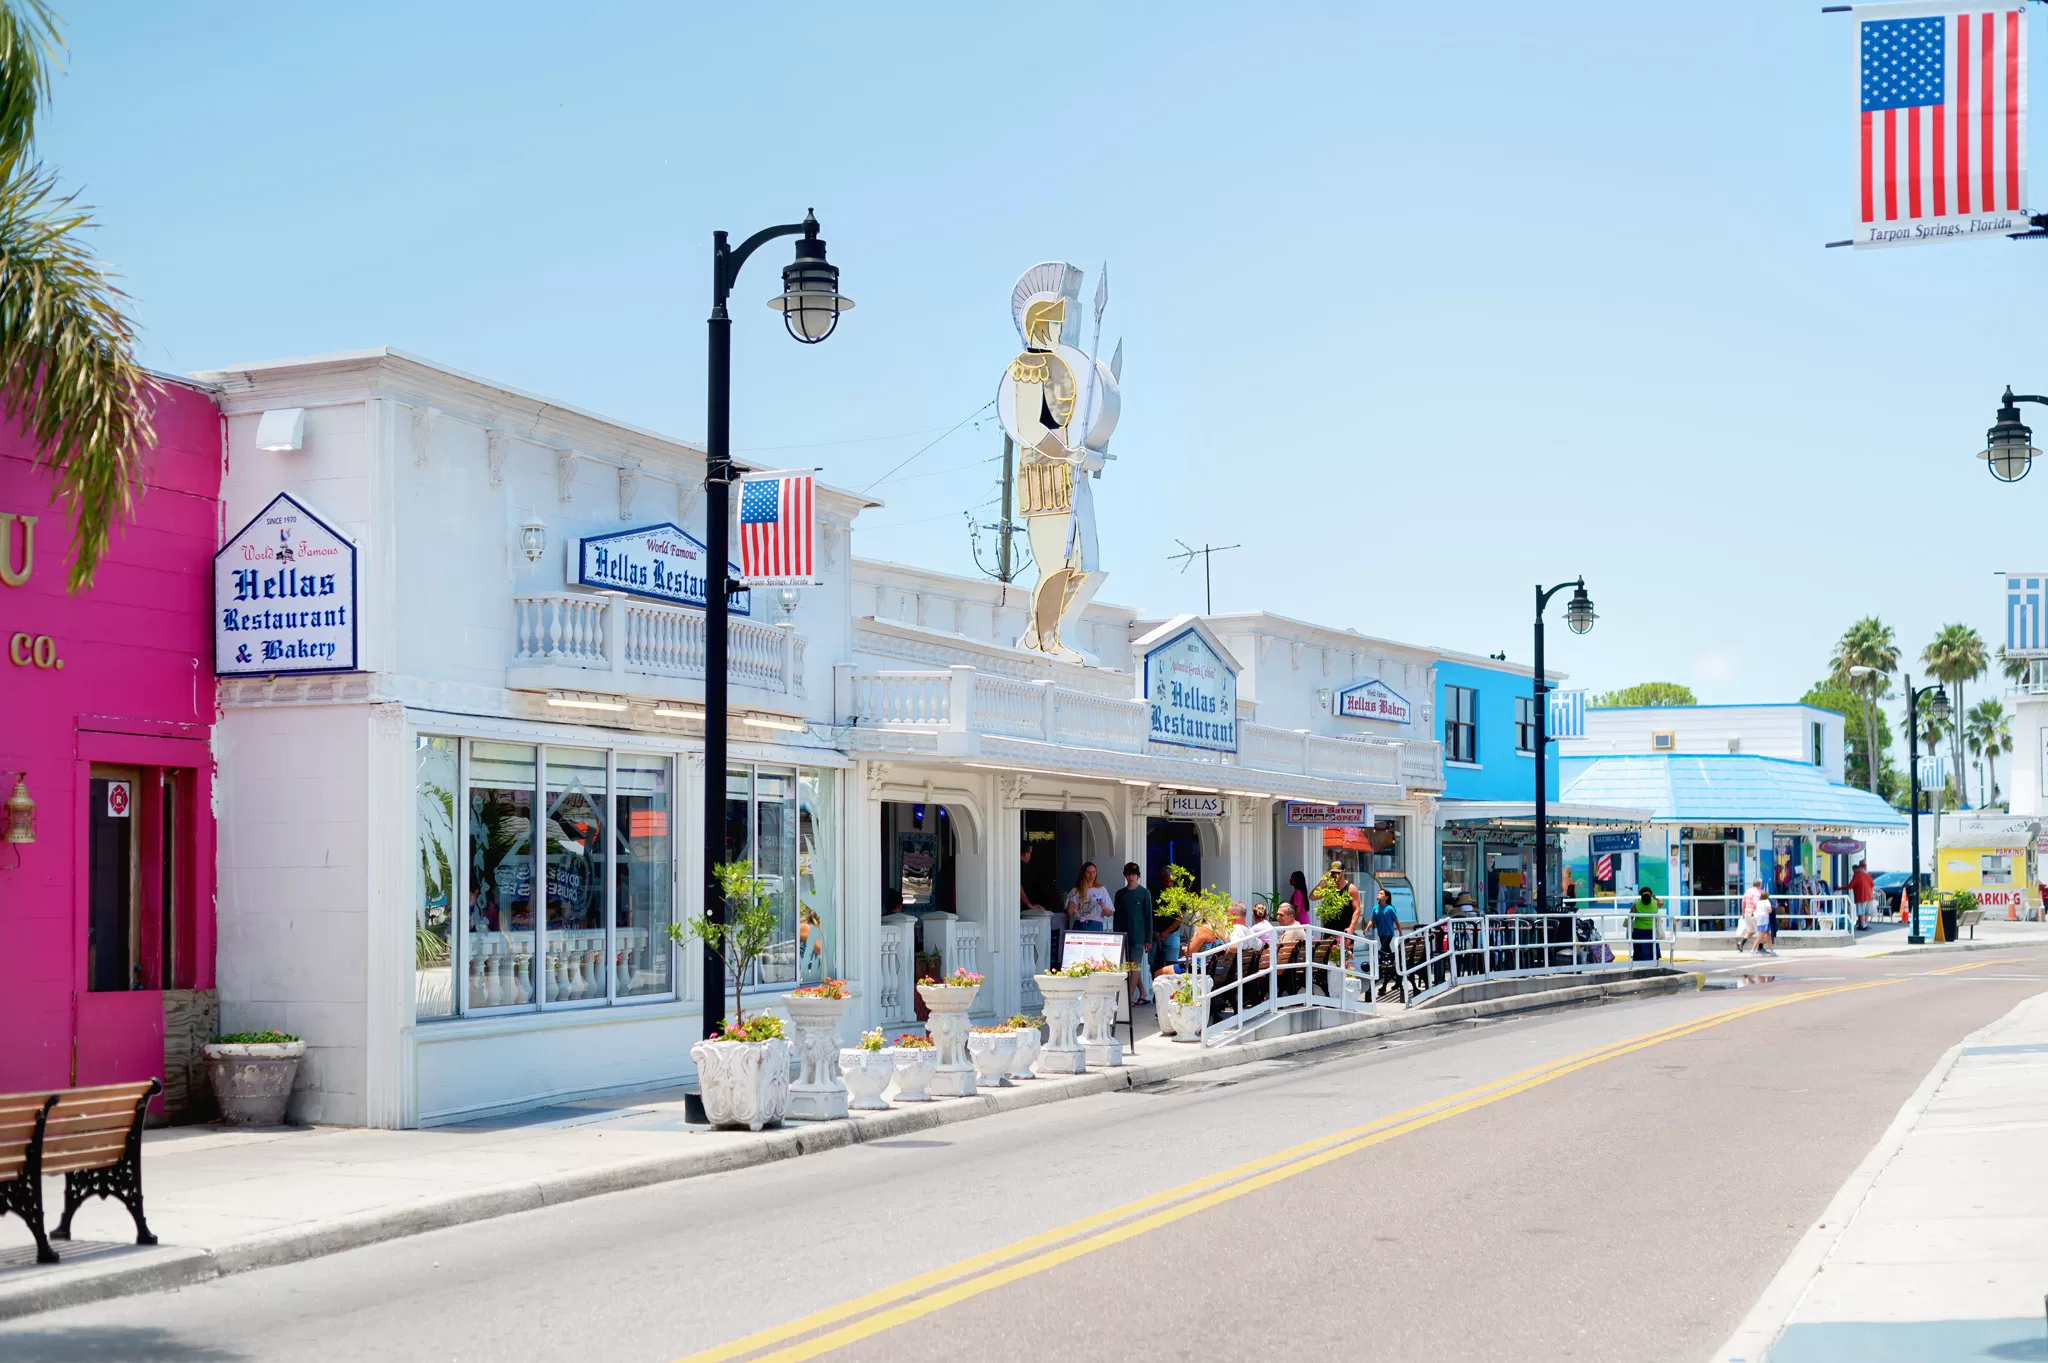 This image is for a blog post about Tarpon Springs Florida and shows Hellas Restaurant in the historic Greek district